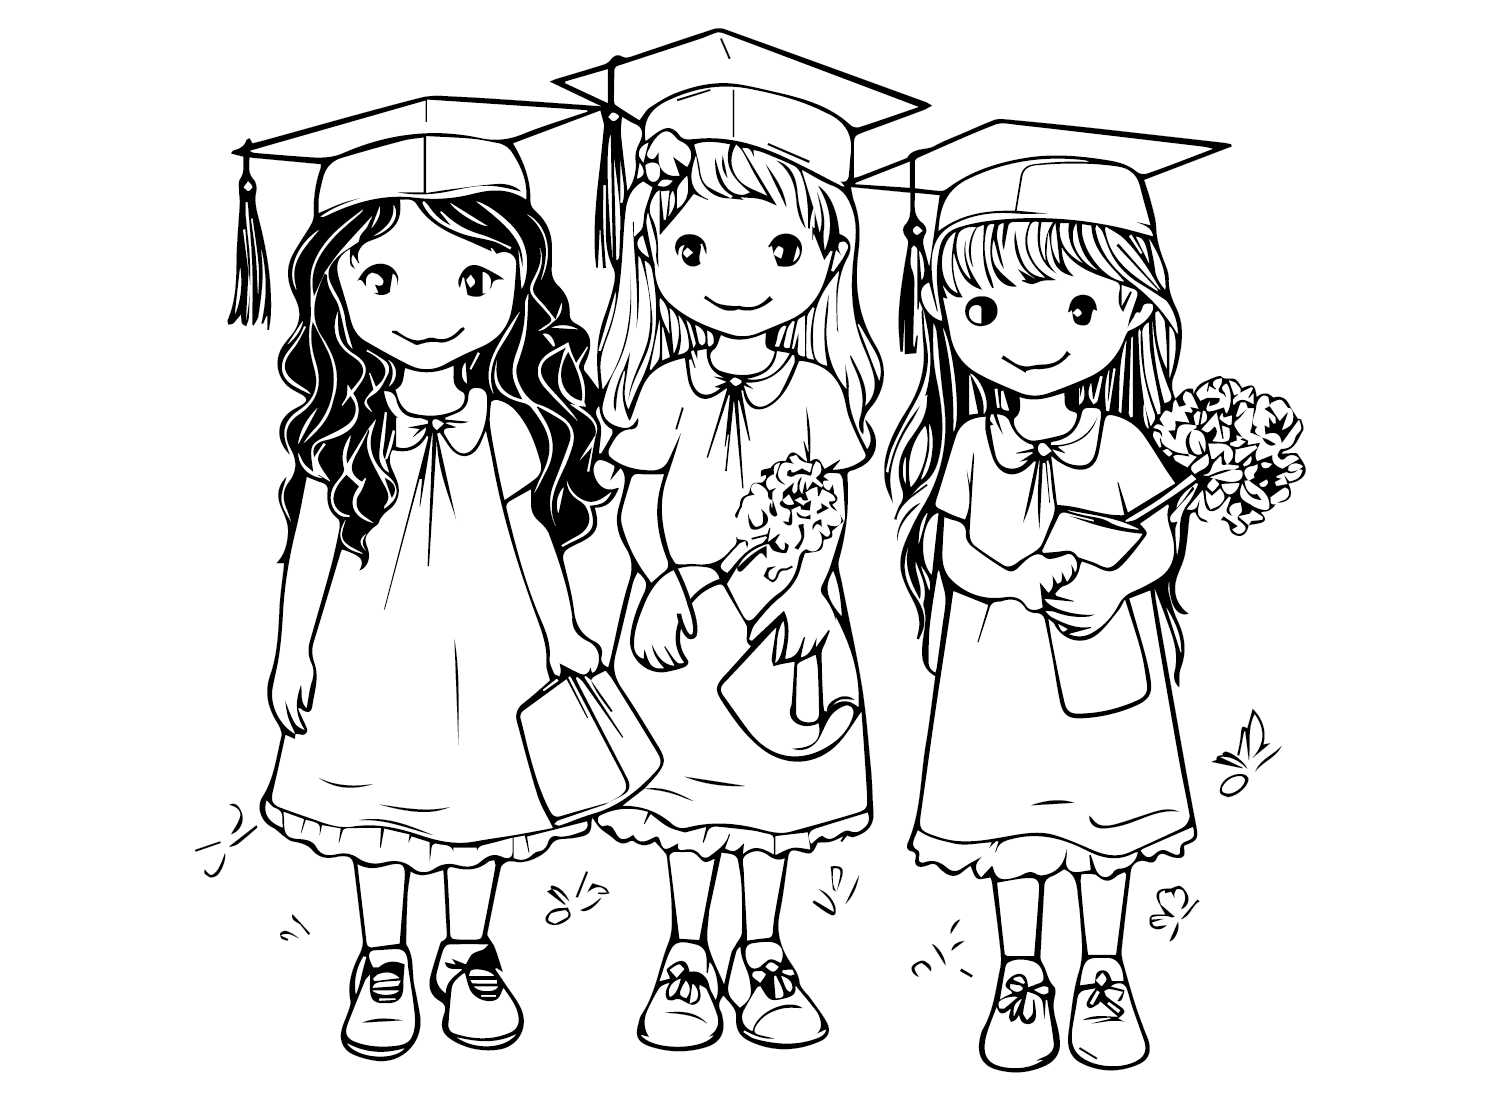 Last Day of School Coloring Pages Online For Kids